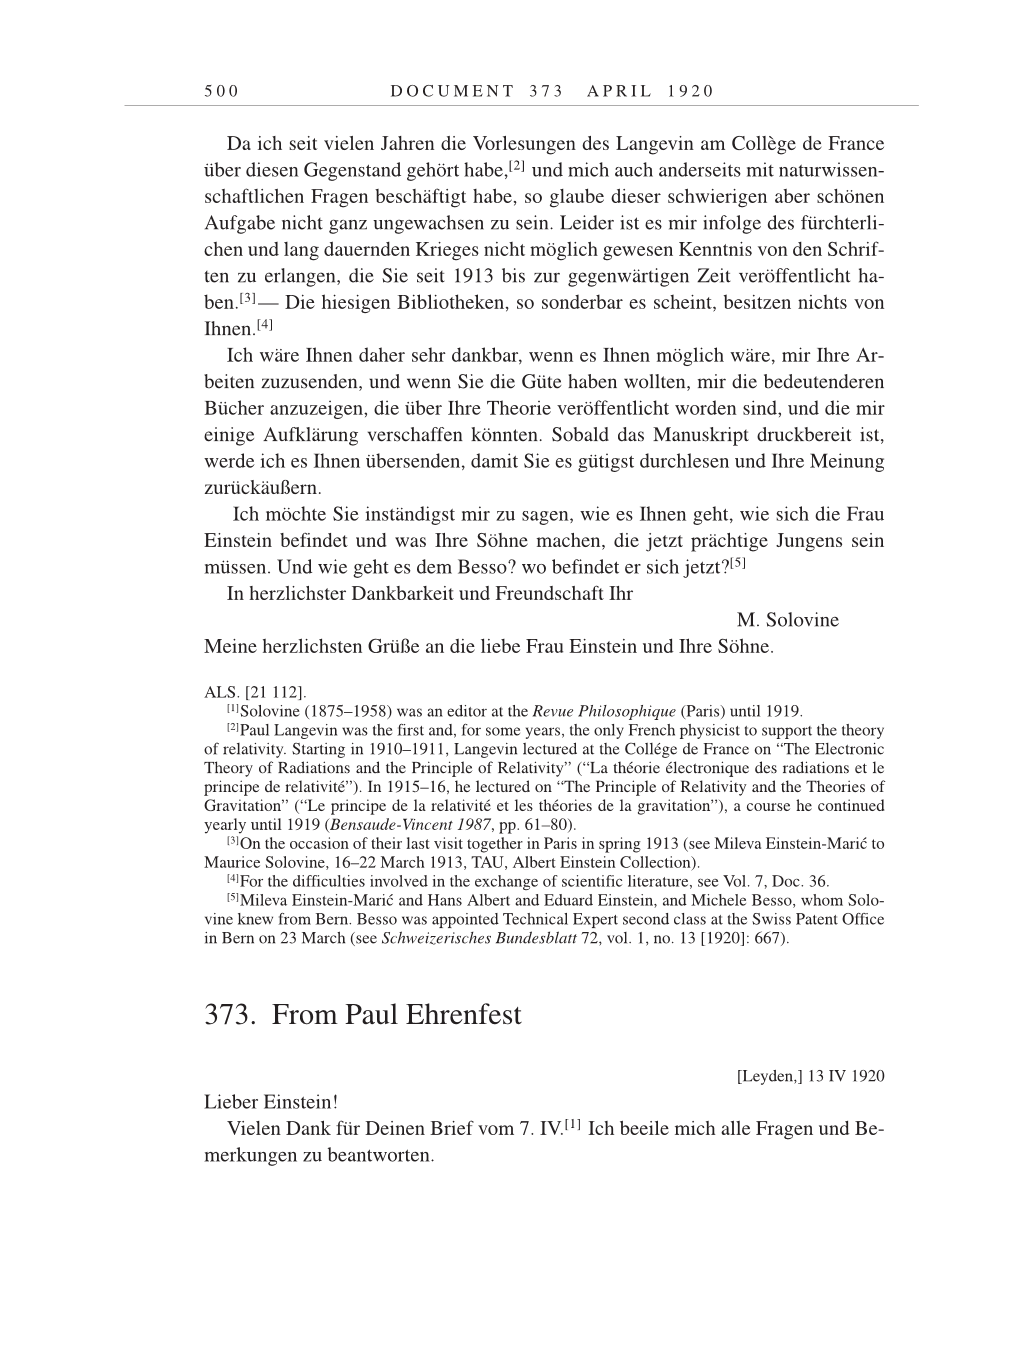 Volume 9: The Berlin Years: Correspondence January 1919-April 1920 page 500